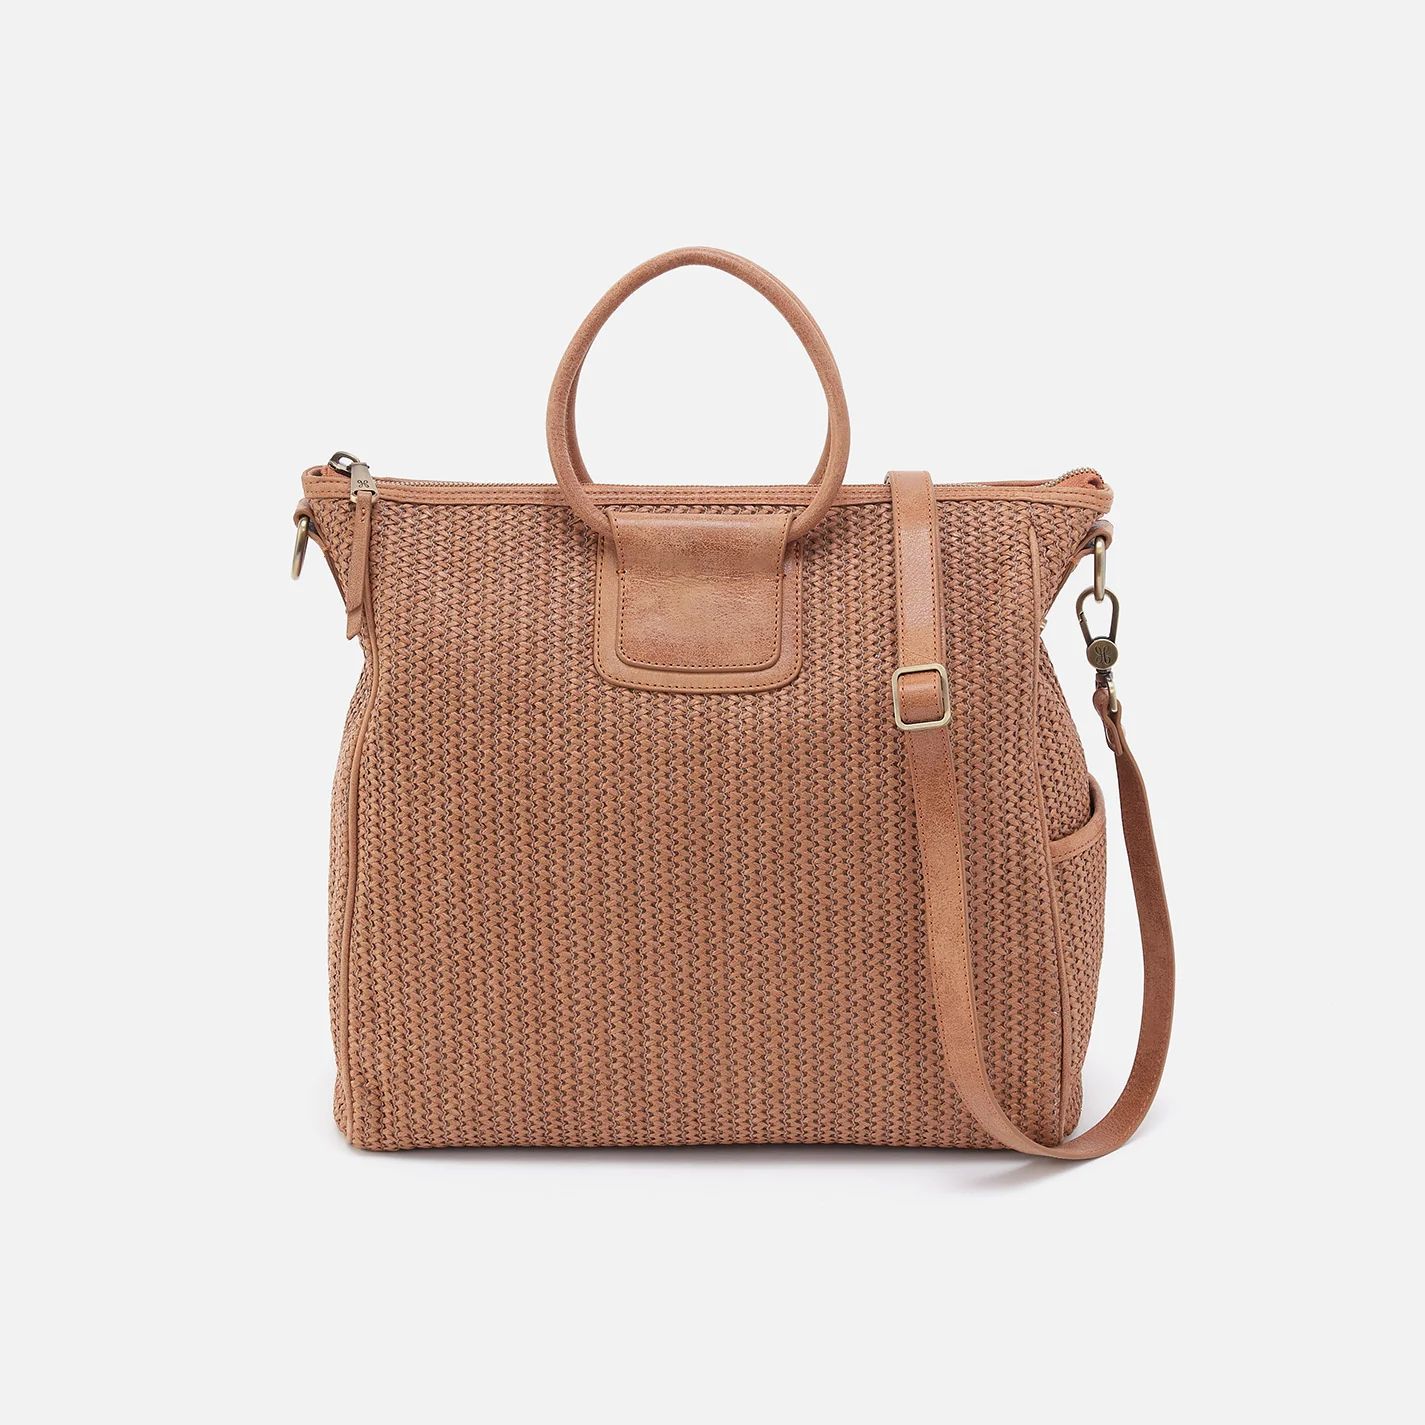 Sheila Large Satchel in Raffia With Leather Trim - Sepia | HOBO Bags